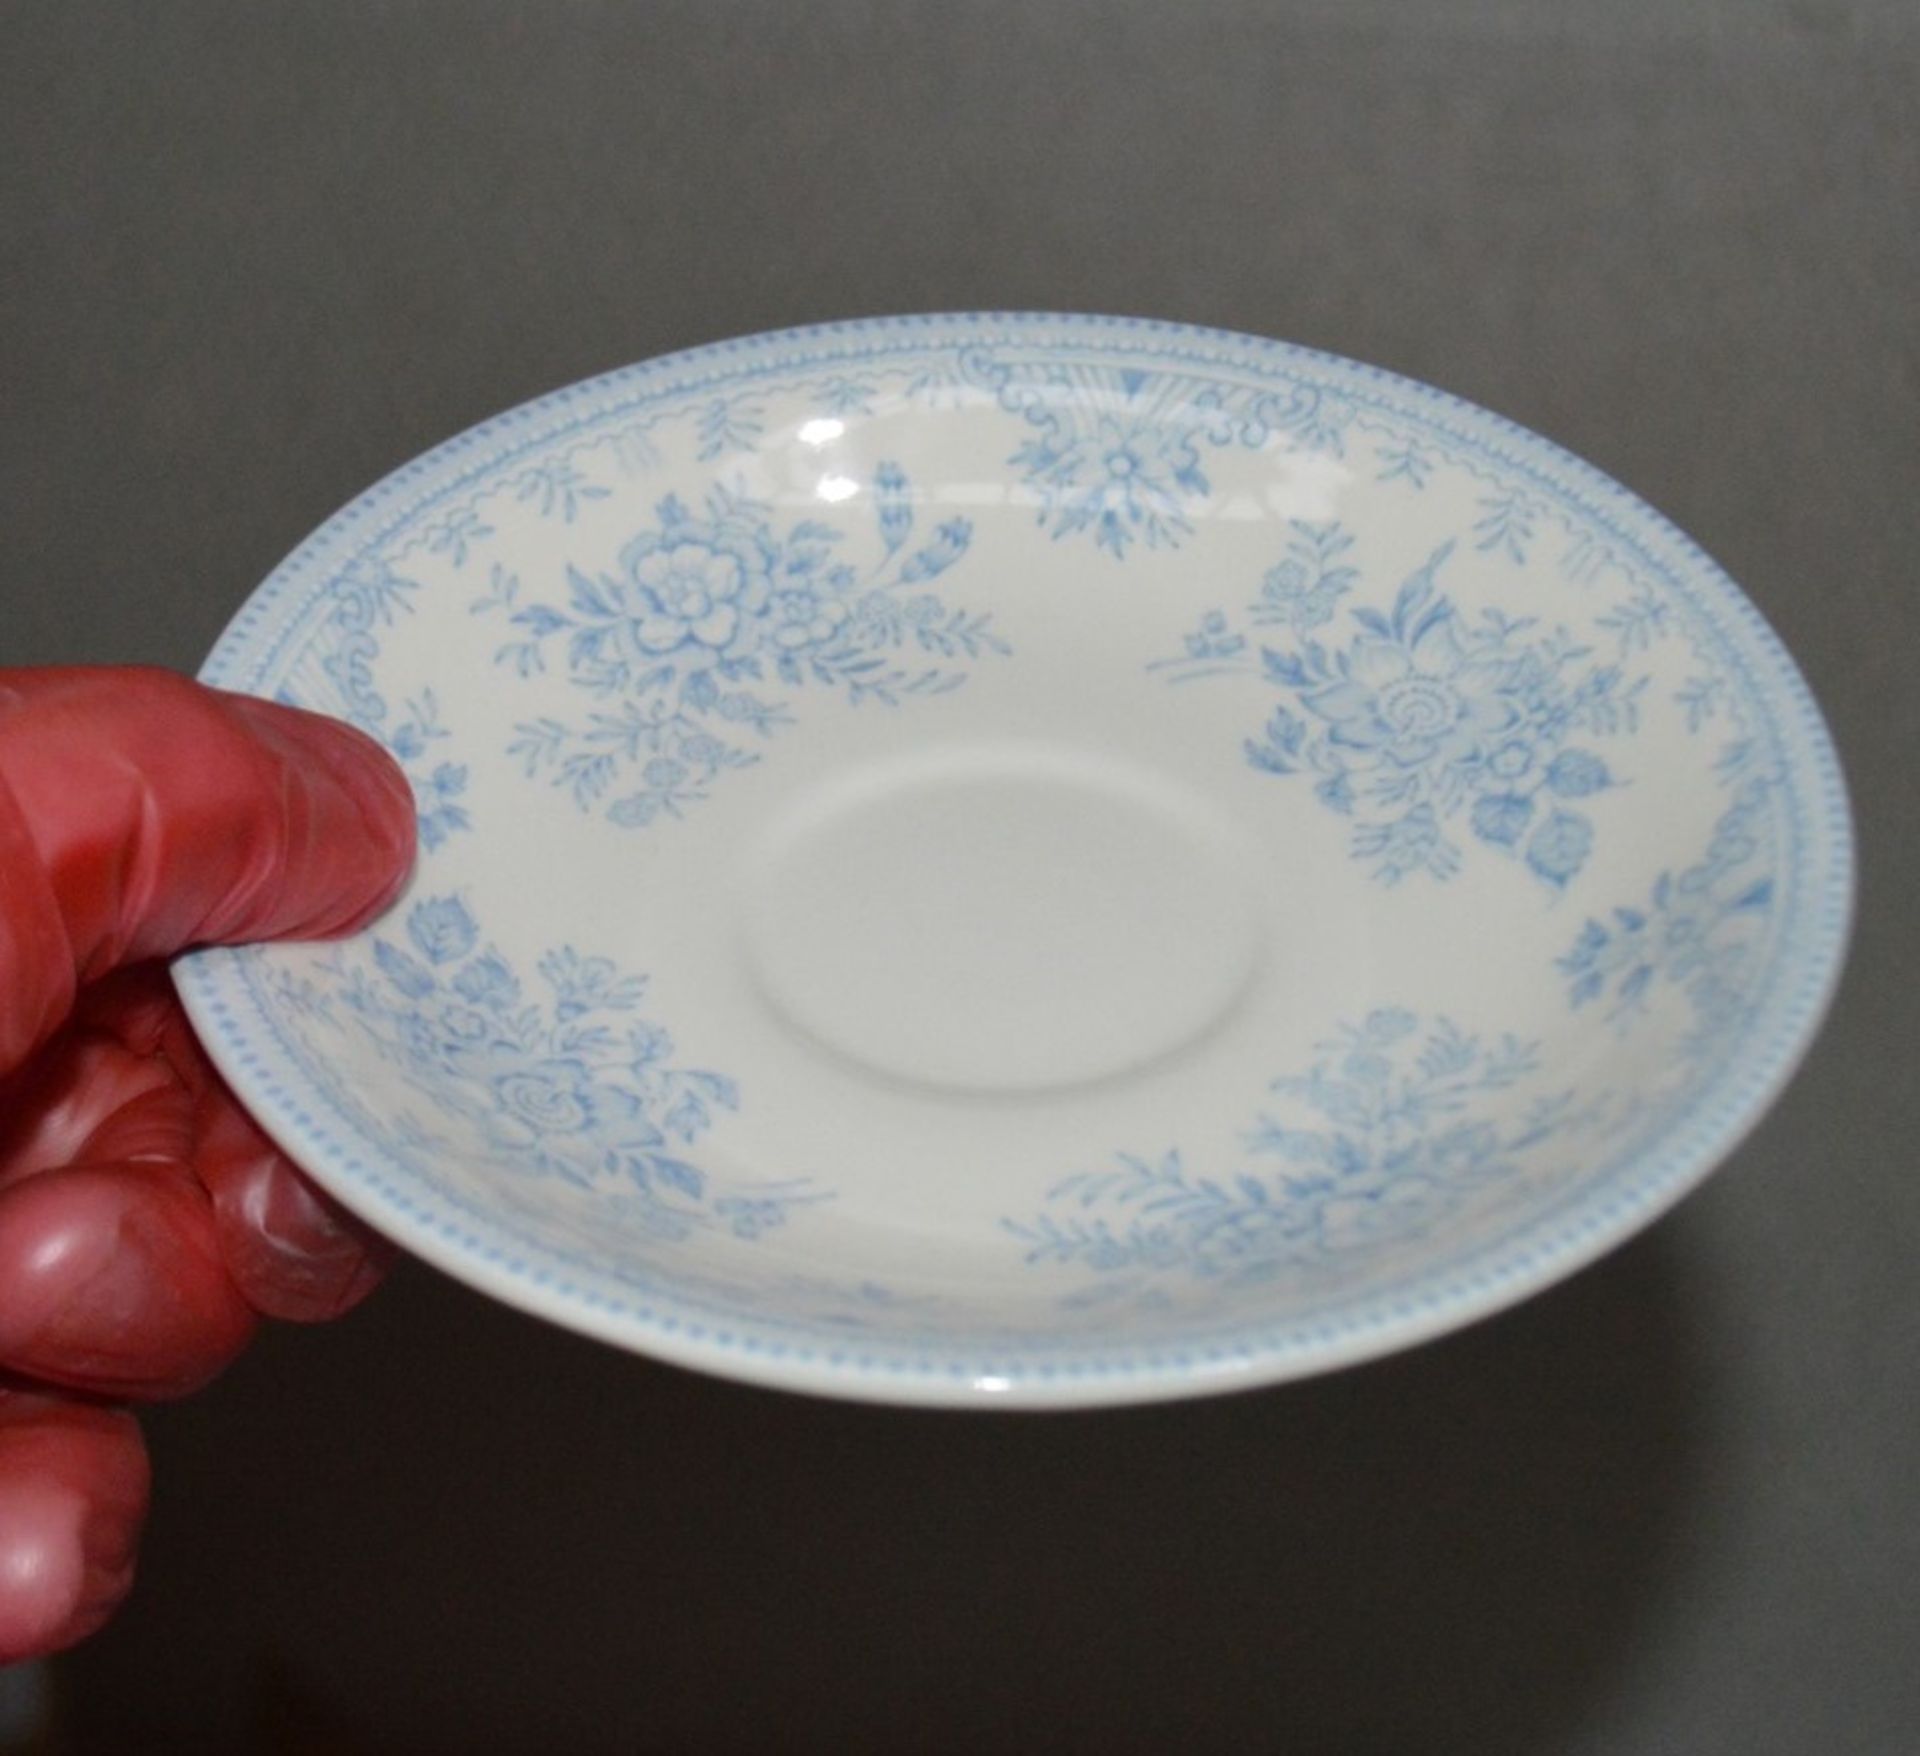 12 x BURLEIGH 'Blue Asiatic Pheasants' Handmade Teacup-Saucers - Unboxed Stock - Ref: HHW211-212/ - Image 3 of 5